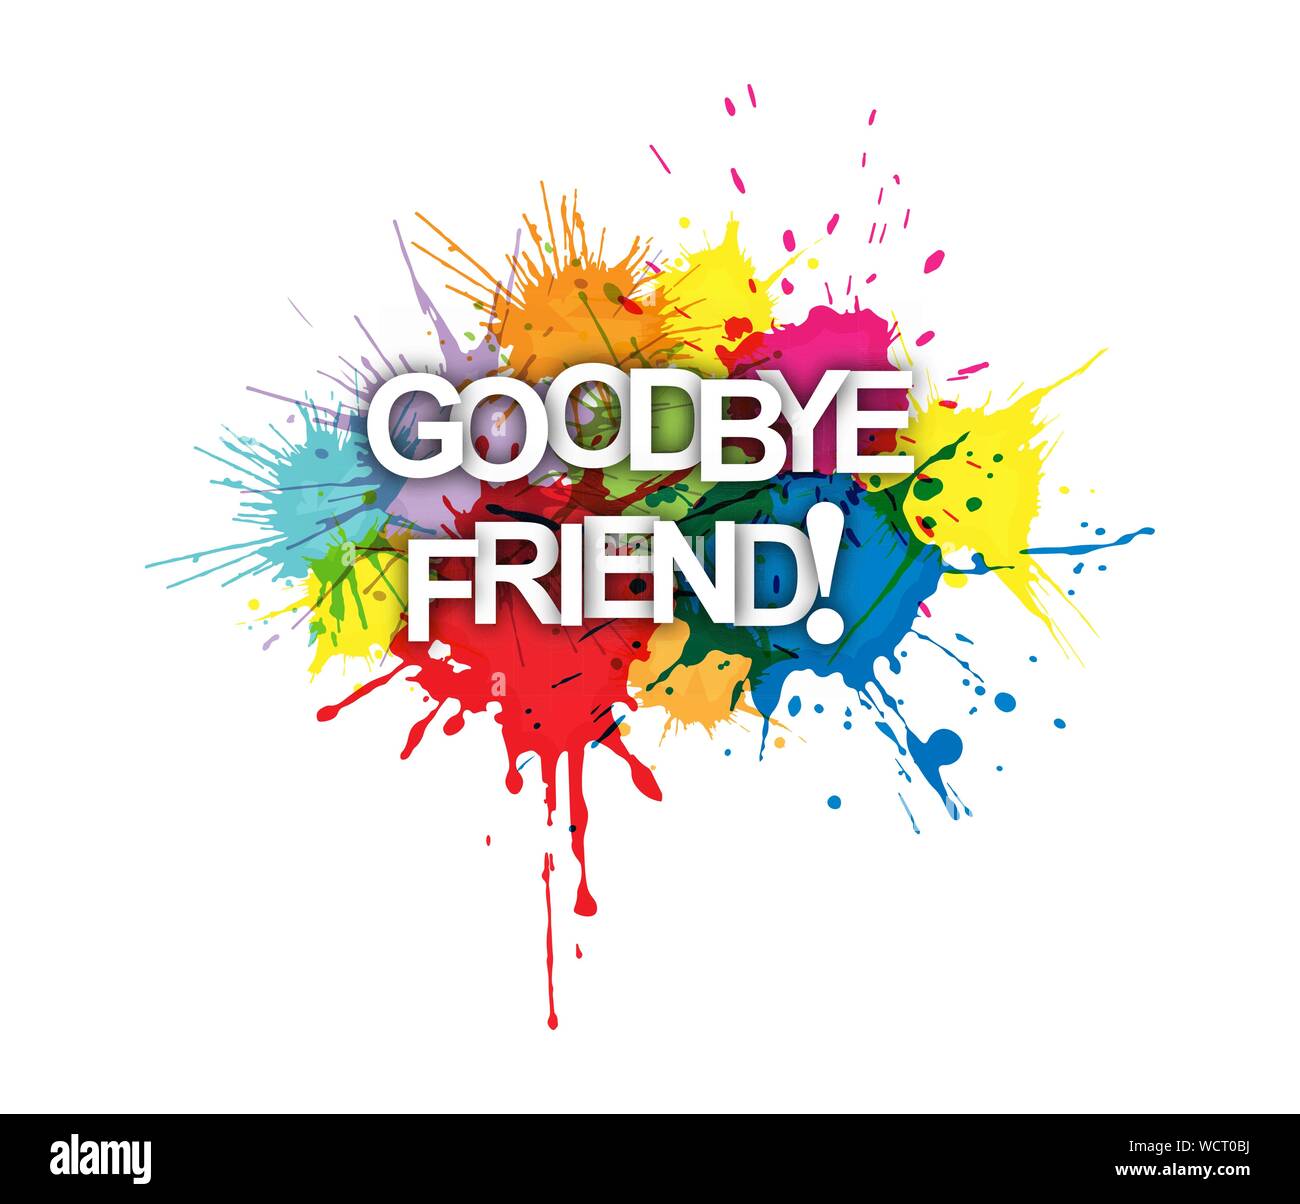 GOODBYE FRIEND! The phrase on the colored spray paint. Stock Vector